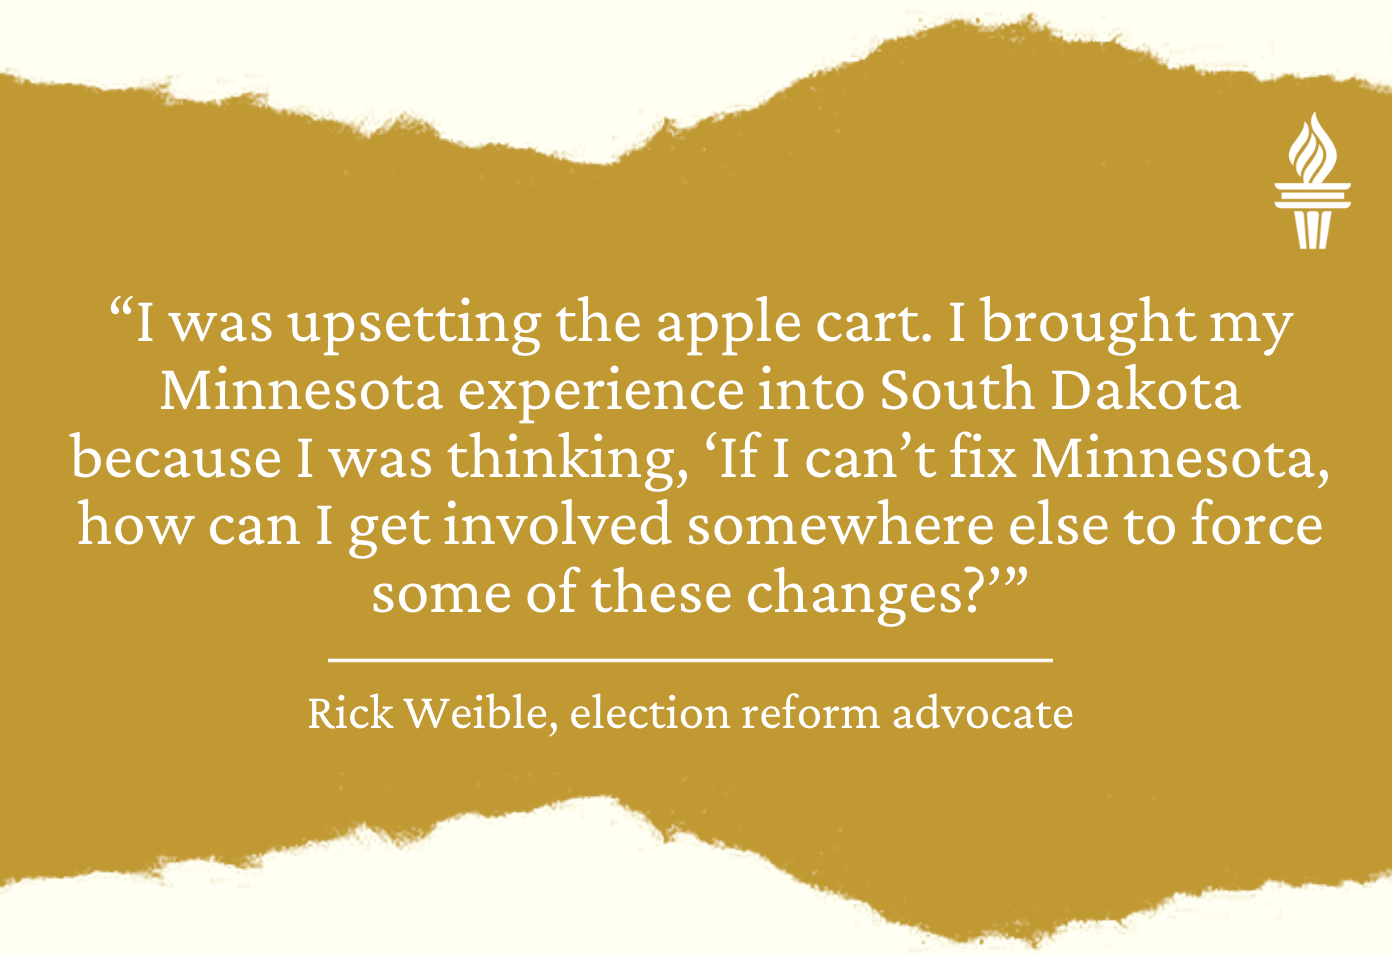 Quote from Rick Weible, election reform advocate: "I was upsetting the apple cart. I brought my Minnesota experience into South Dakota because I was thinking, 'If I can't fix Minnesota, how can I get involved somewhere else to force some of the changes."